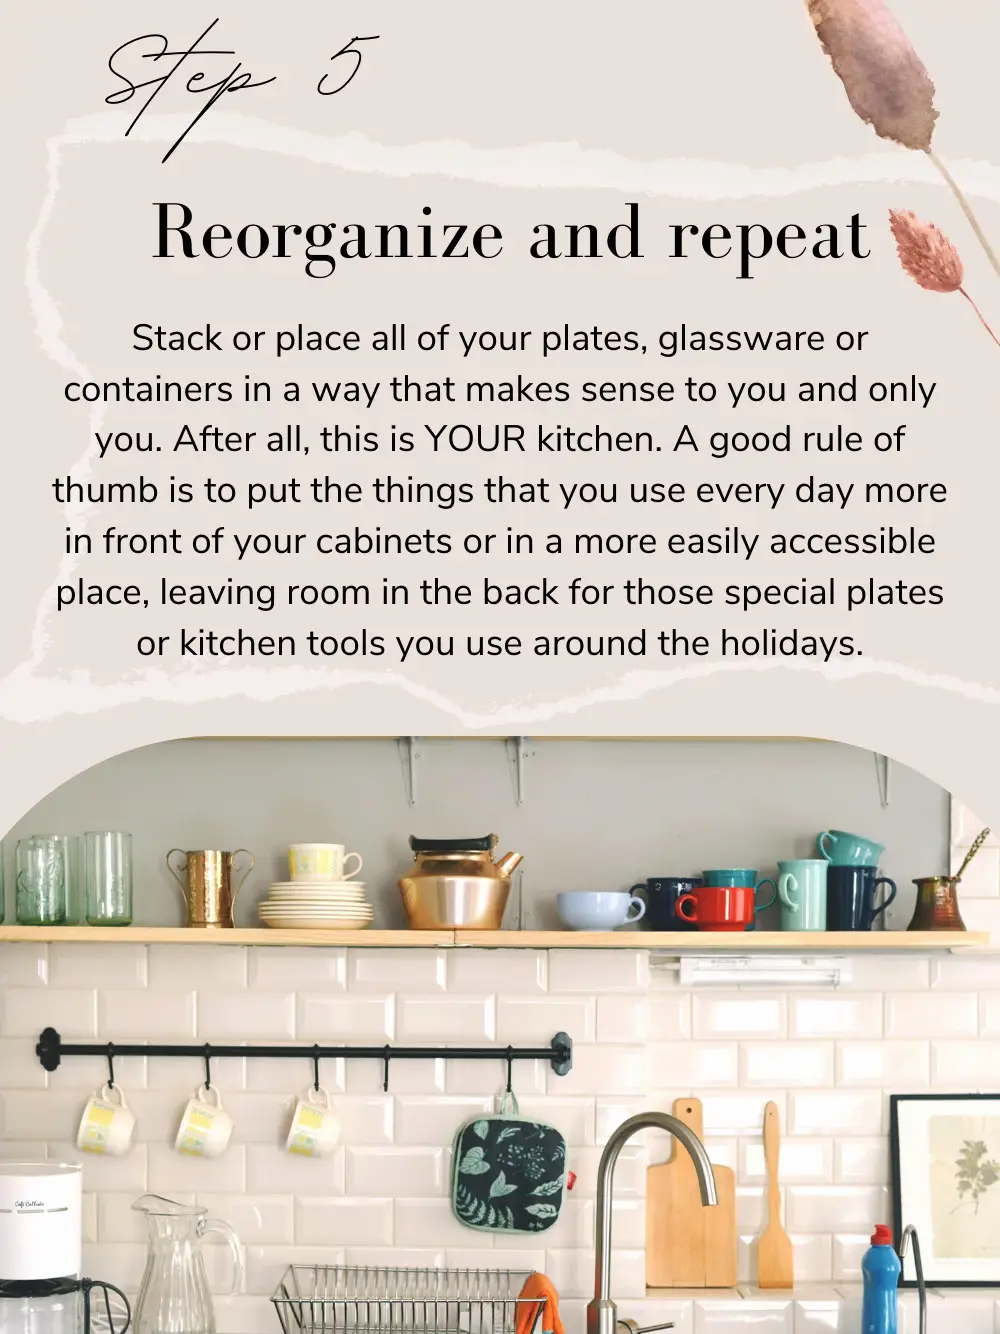 Simple Swaps for a Sustainable Kitchen